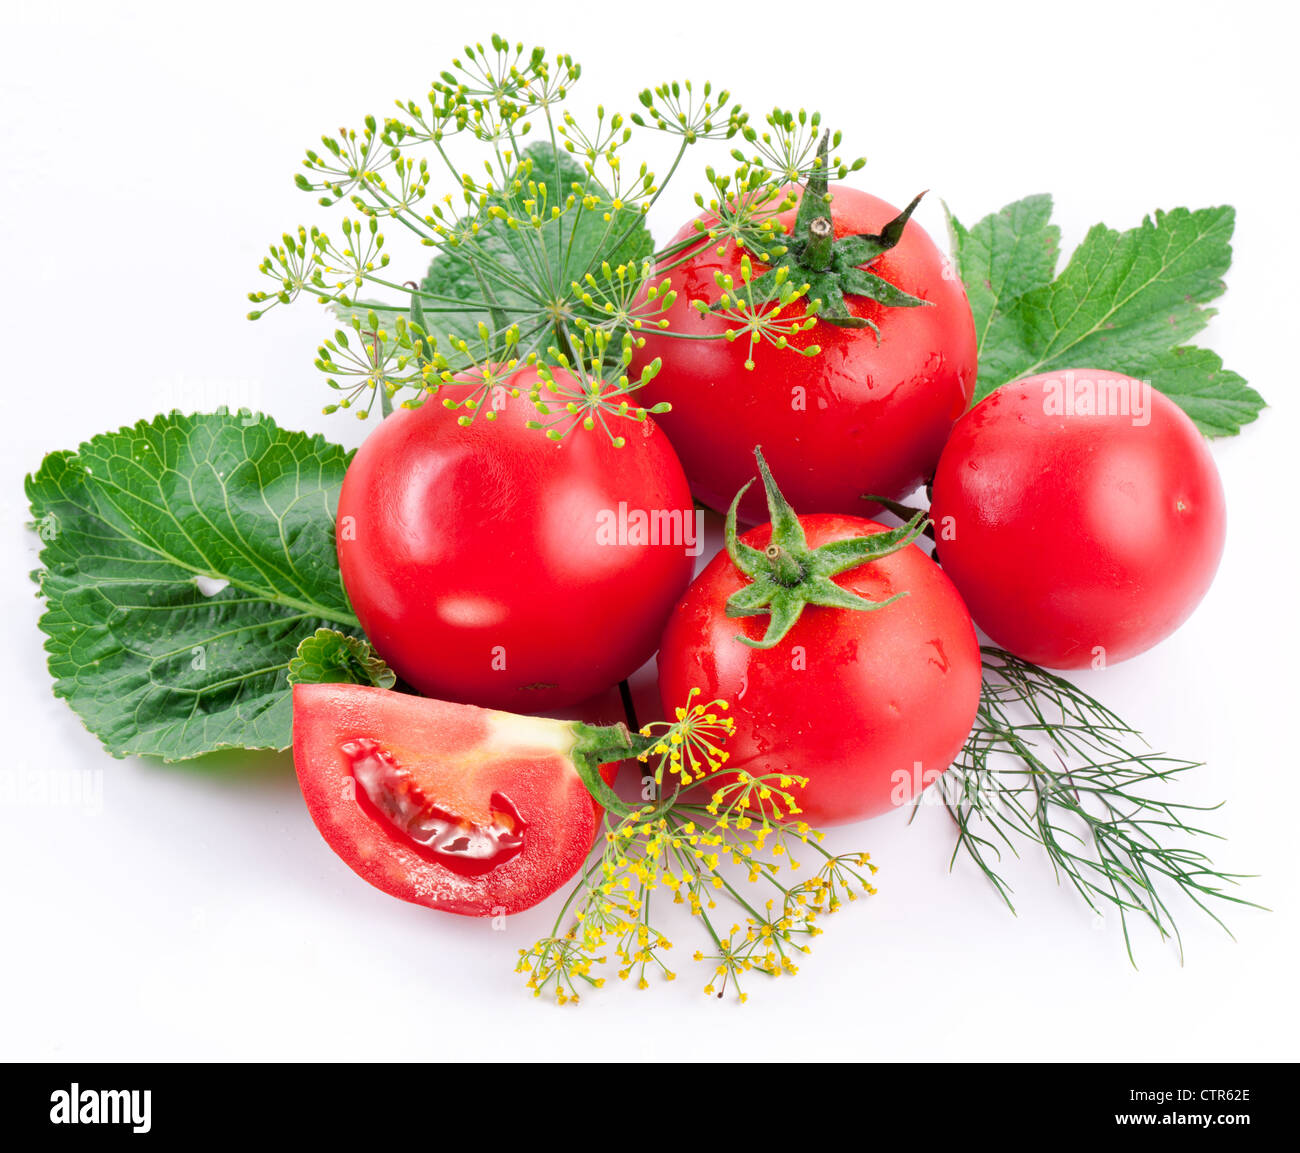 Tomatoes, cooked with herbs for the preservation on a white background. Stock Photo